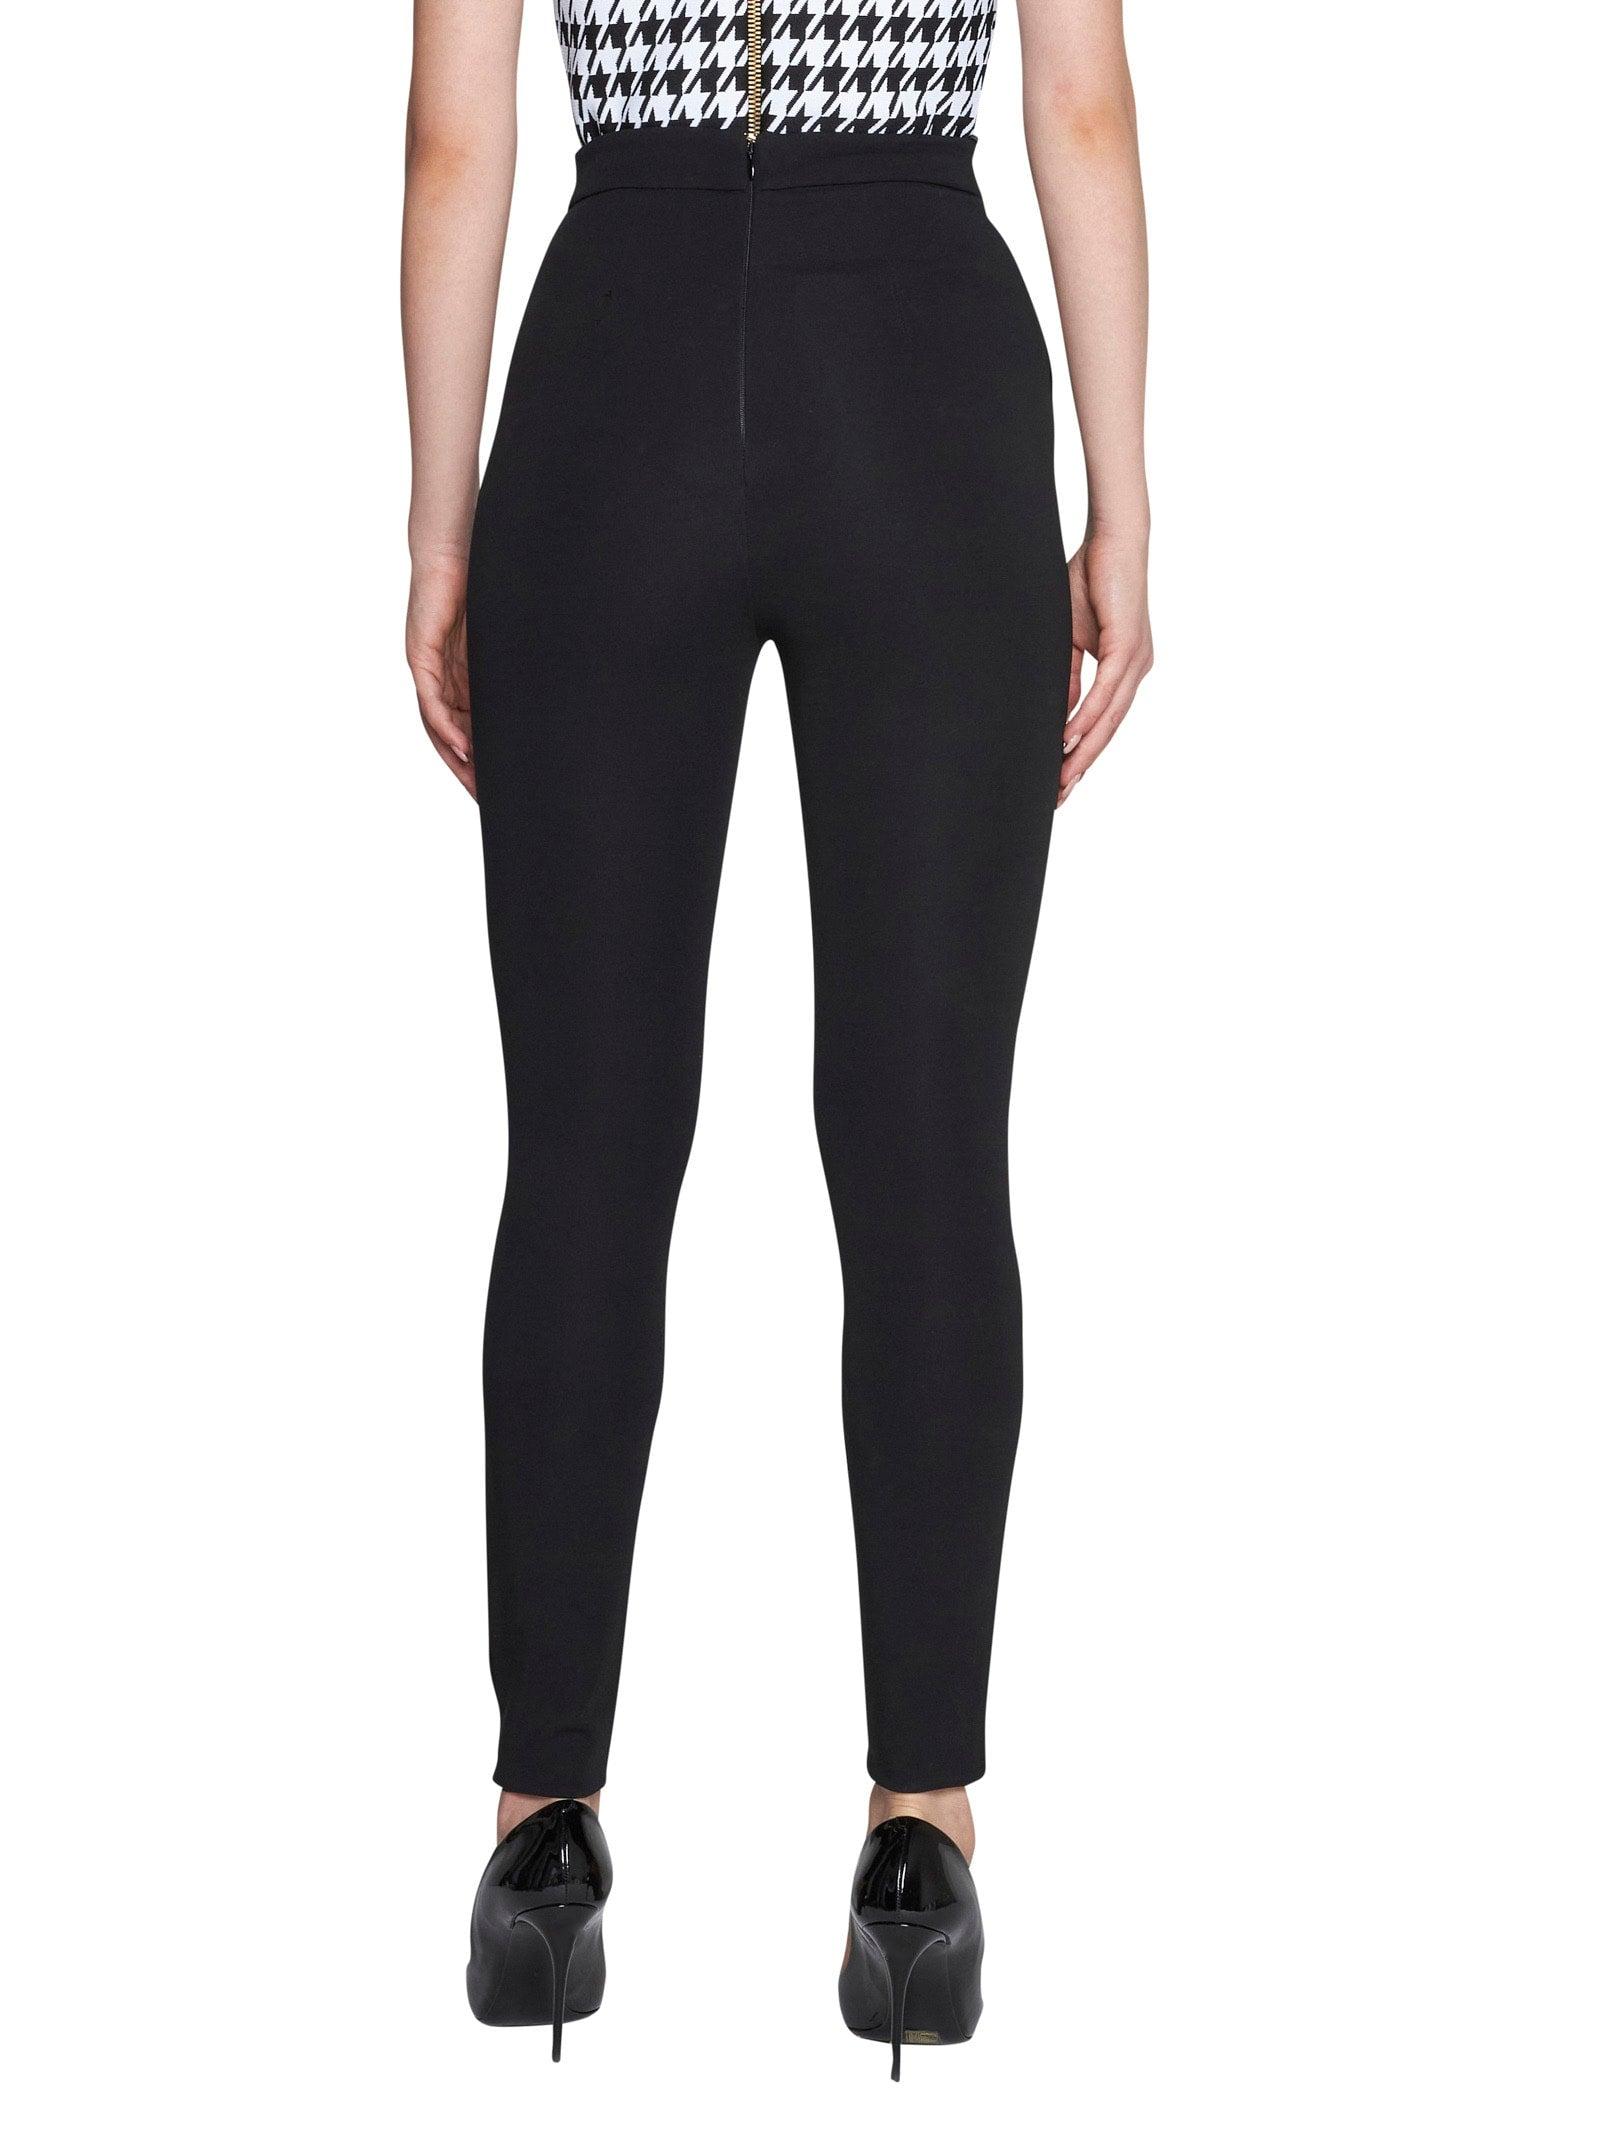 Slacks and Chinos Skinny trousers Save 52% Balmain Synthetic Hw 6btn Jersey Stretch Skinny Pants in Black Womens Clothing Trousers 